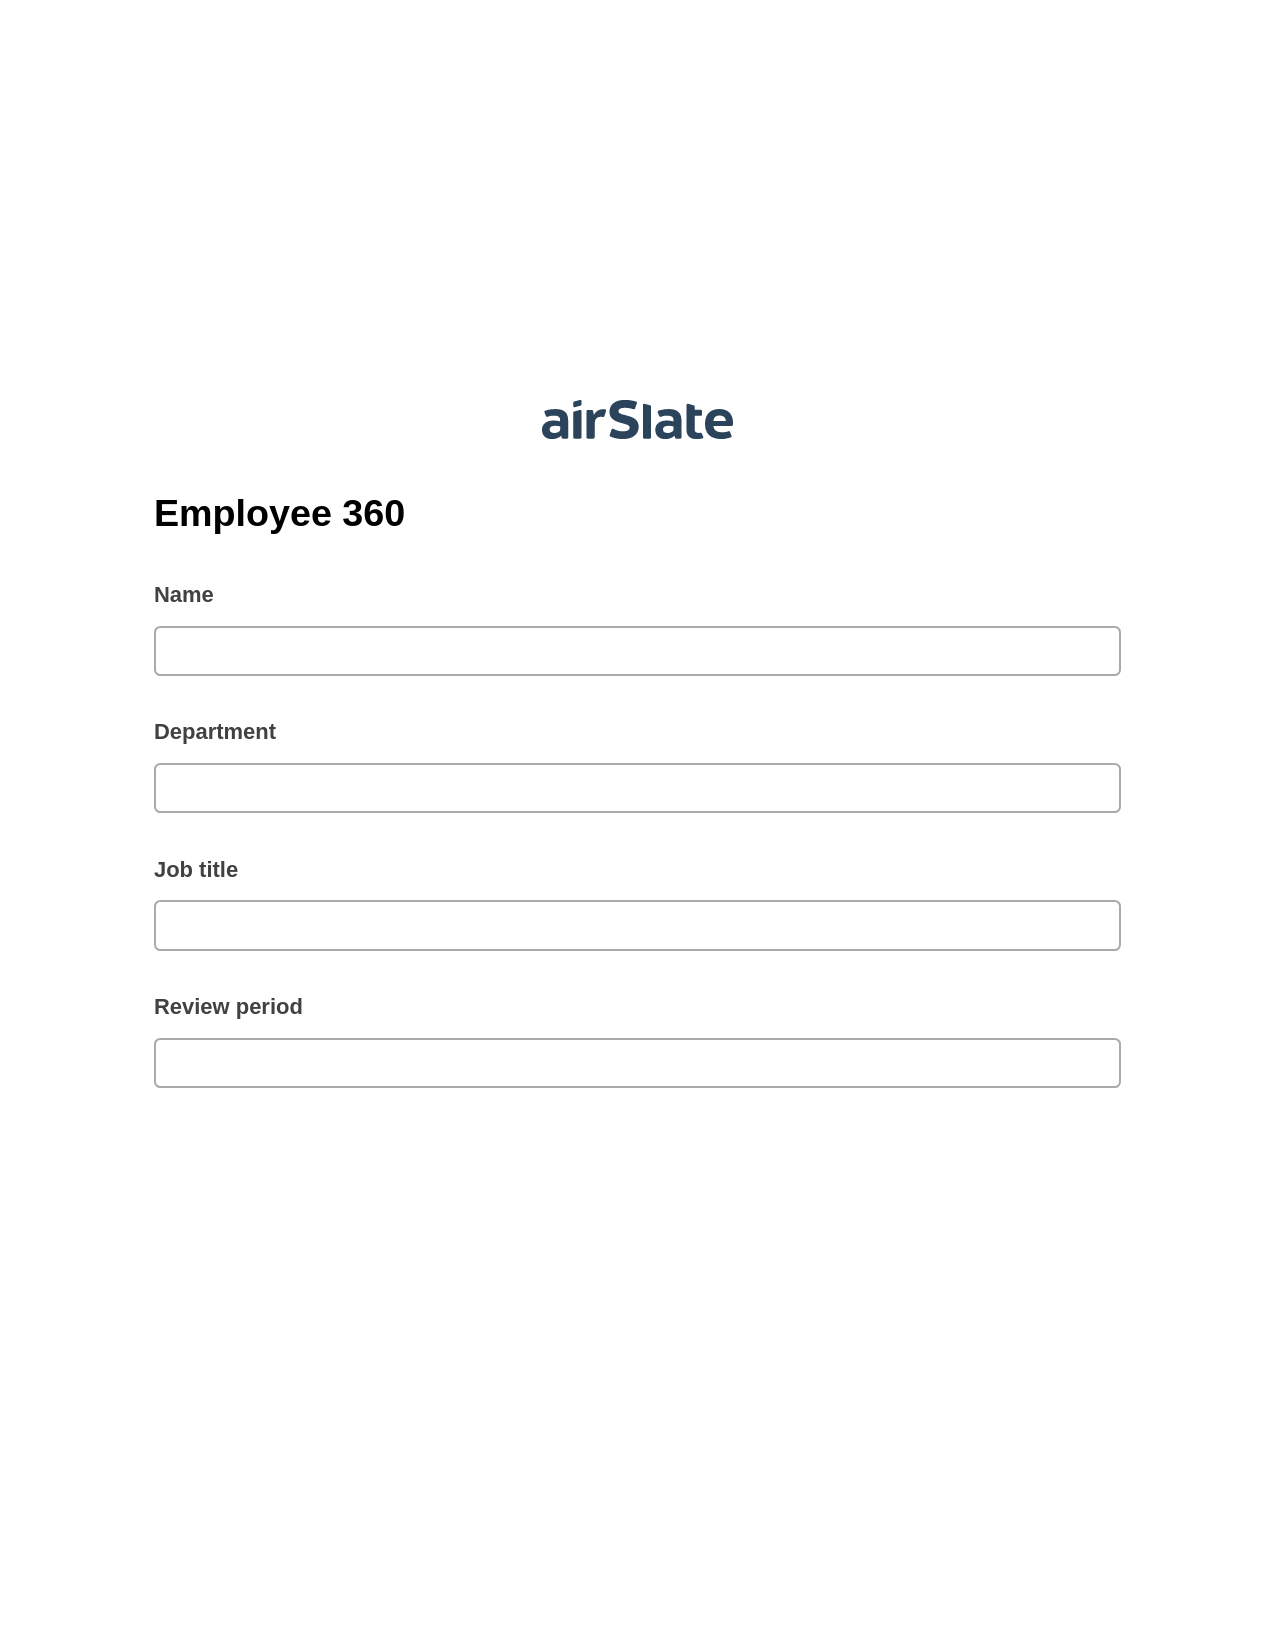 Multirole Employee 360 Pre-fill from Google Sheets Bot, Create MS Dynamics 365 Records Bot, Archive to SharePoint Folder Bot